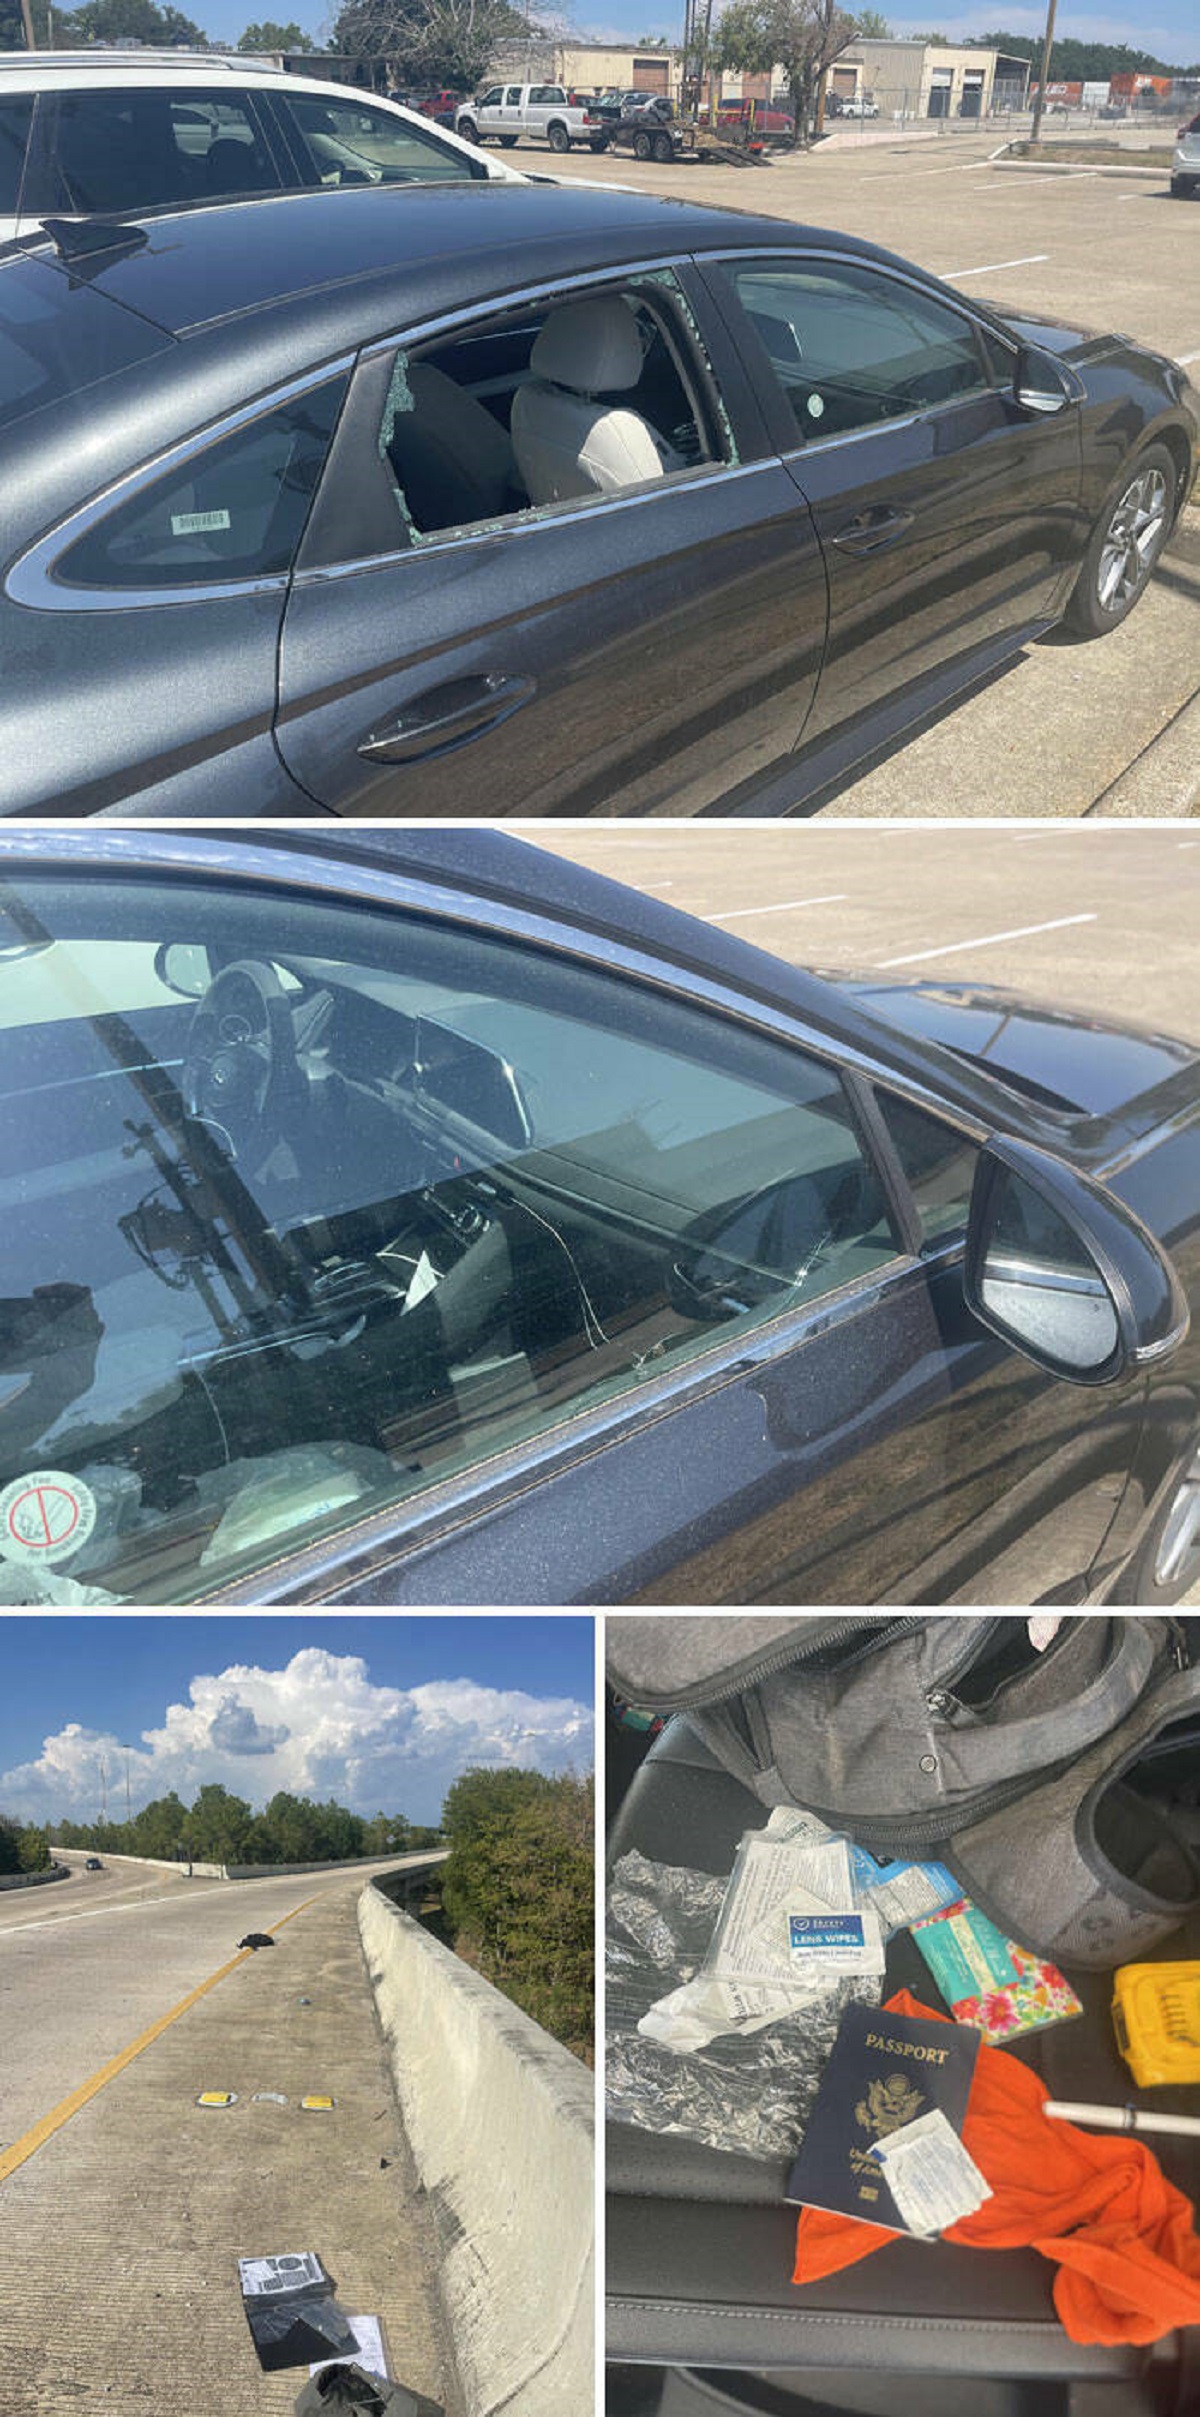 "Left My Carry-On Backpack In The Back Seat Of My Rental Car While I Grabbed Lunch With A Friend"